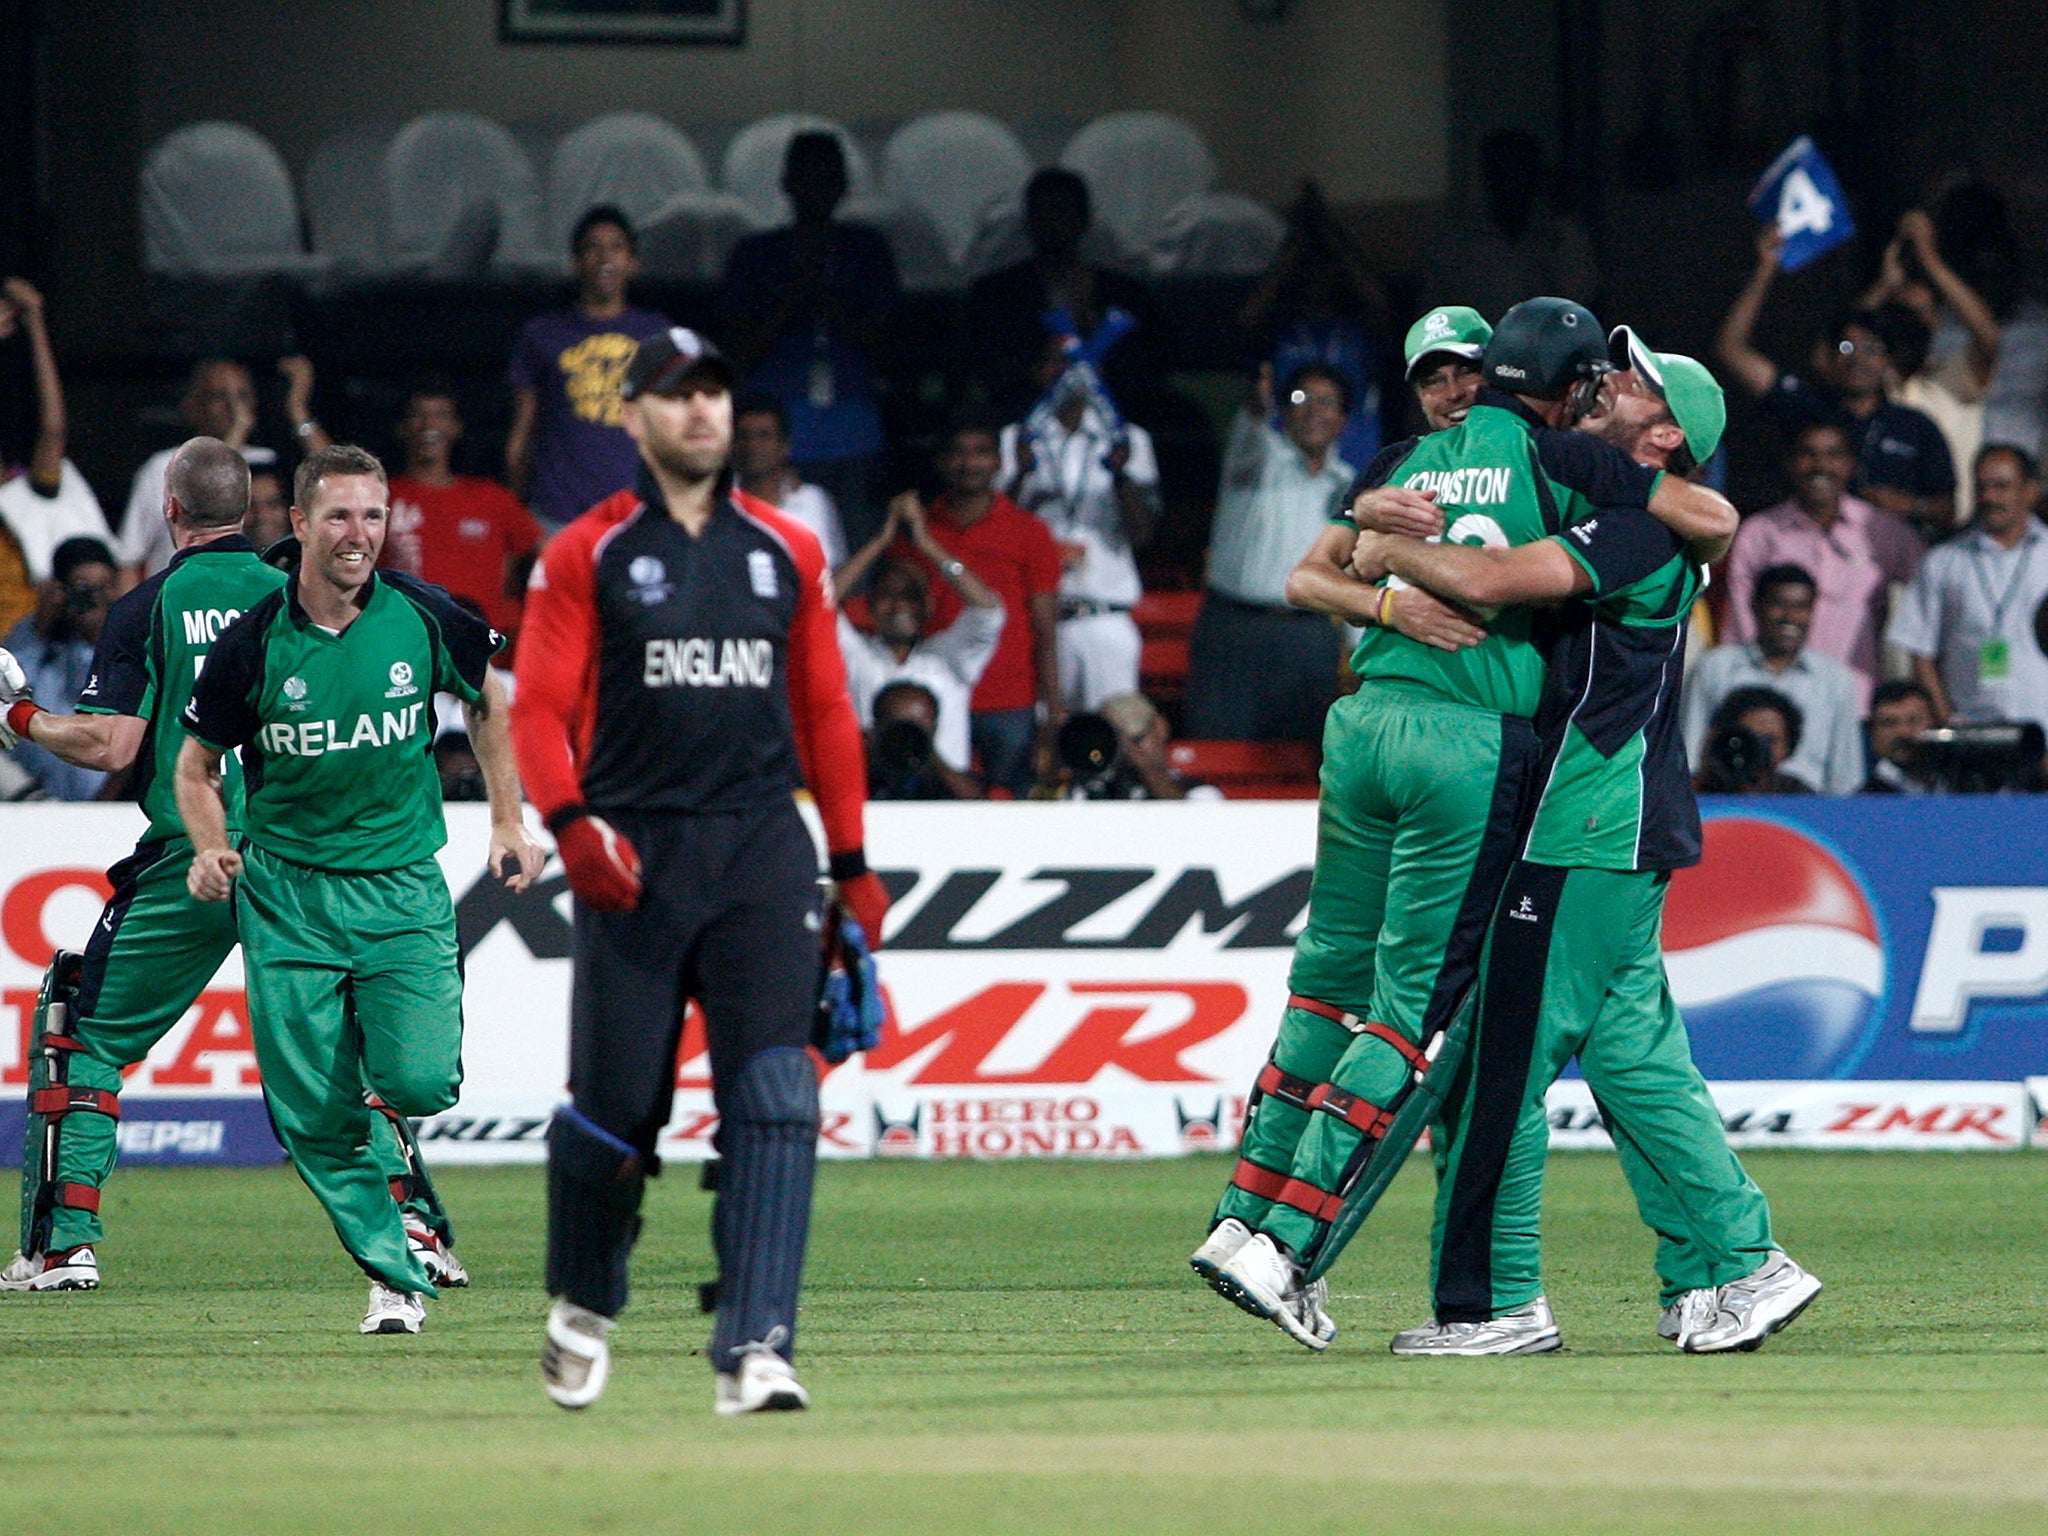 Ireland celebrate their victory over England at the 2011 World Cup – a triumph that has not led to more meetings between the countries